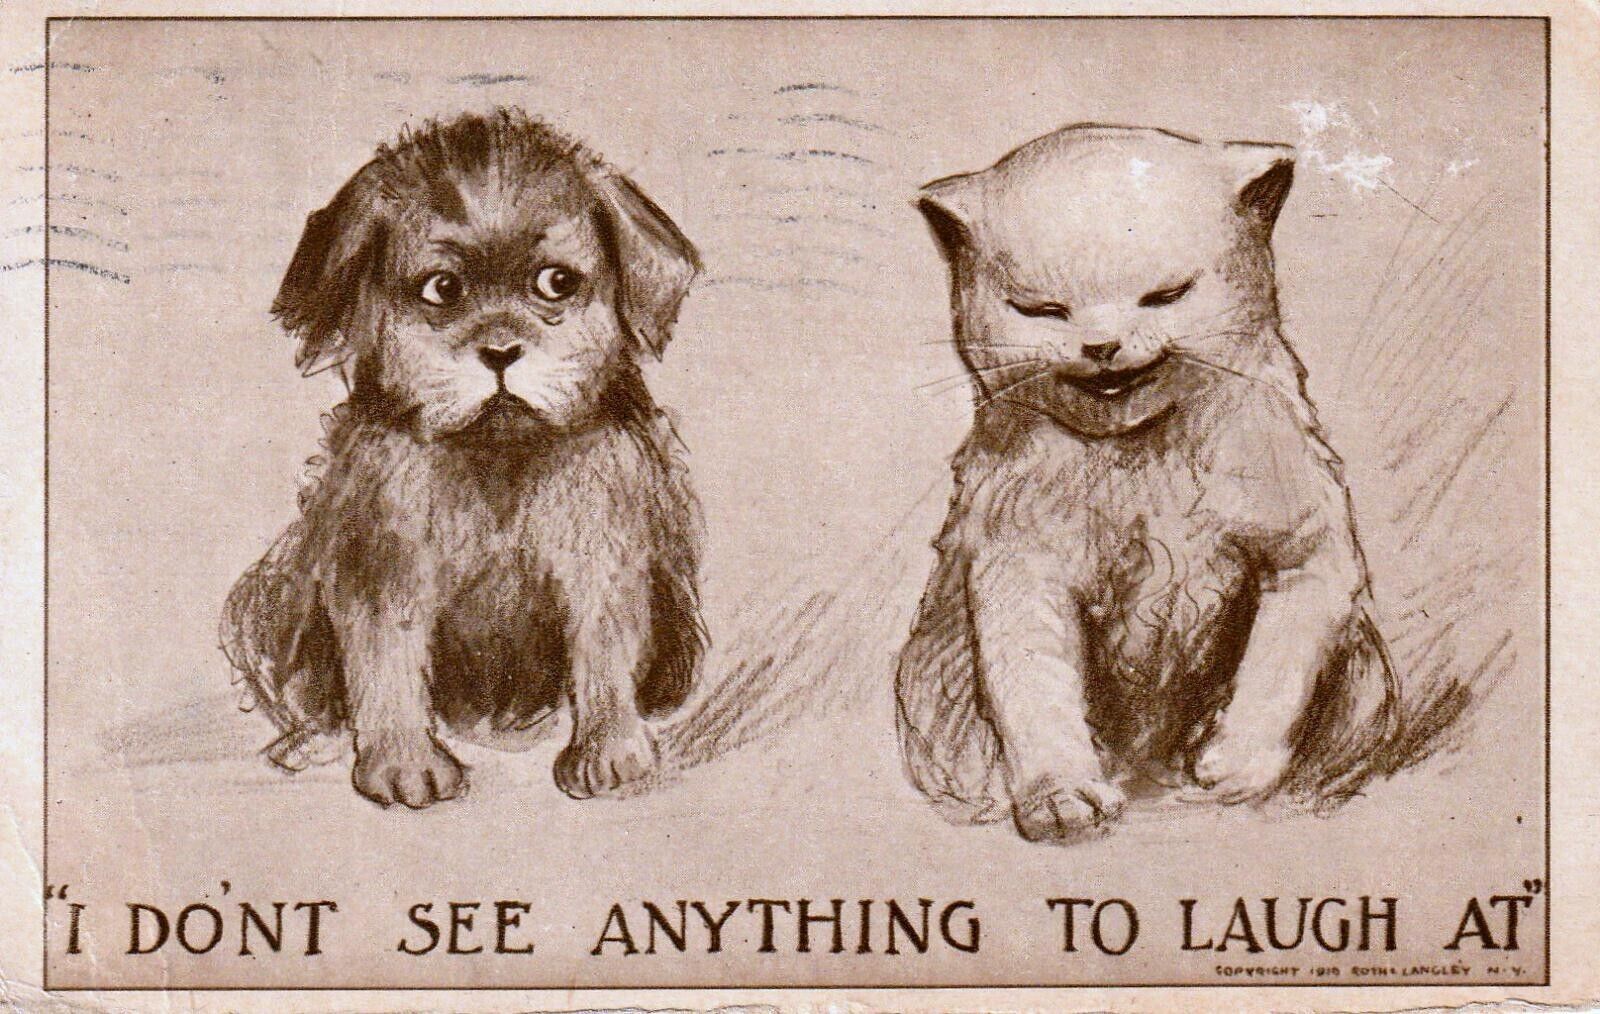 Cat Laughing at Dog - I DON'T SEE ANTHING TO LAUGH AT - R Langley 1910 Postcard